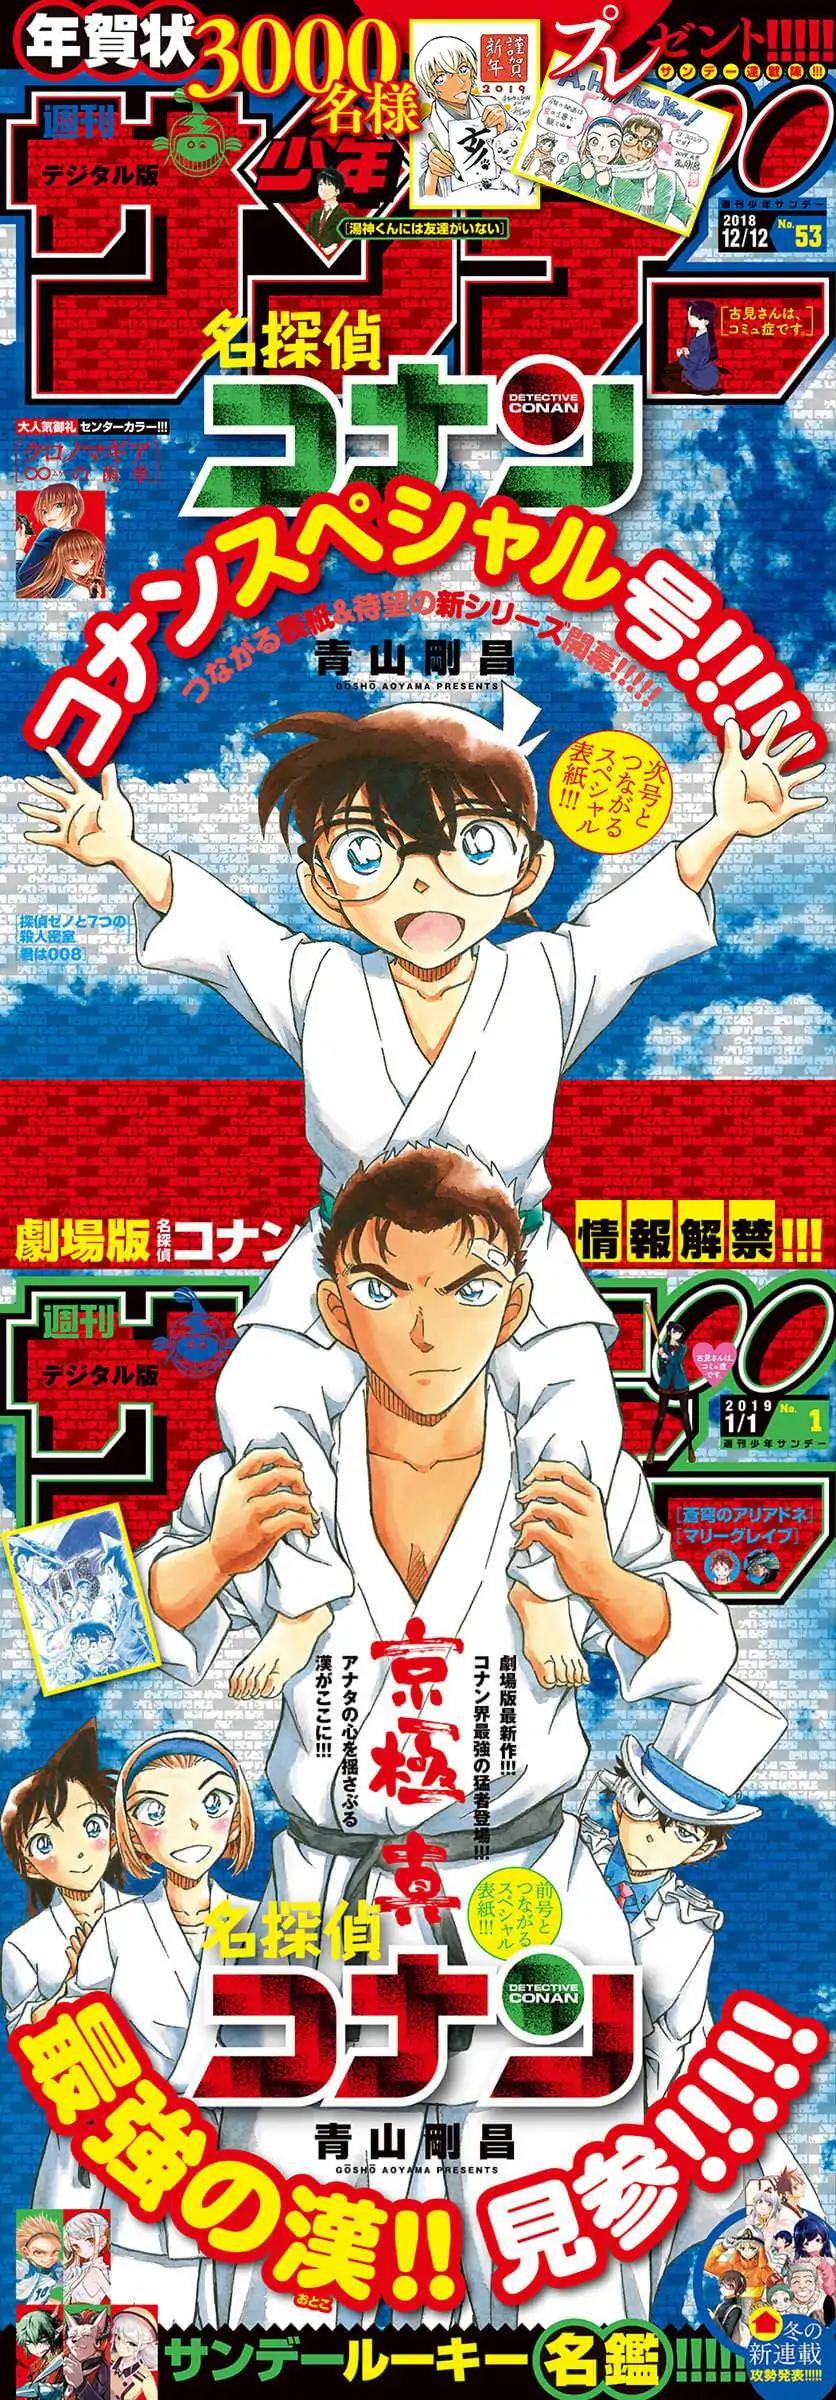 Detective Conan Chapter 1023 Page 1